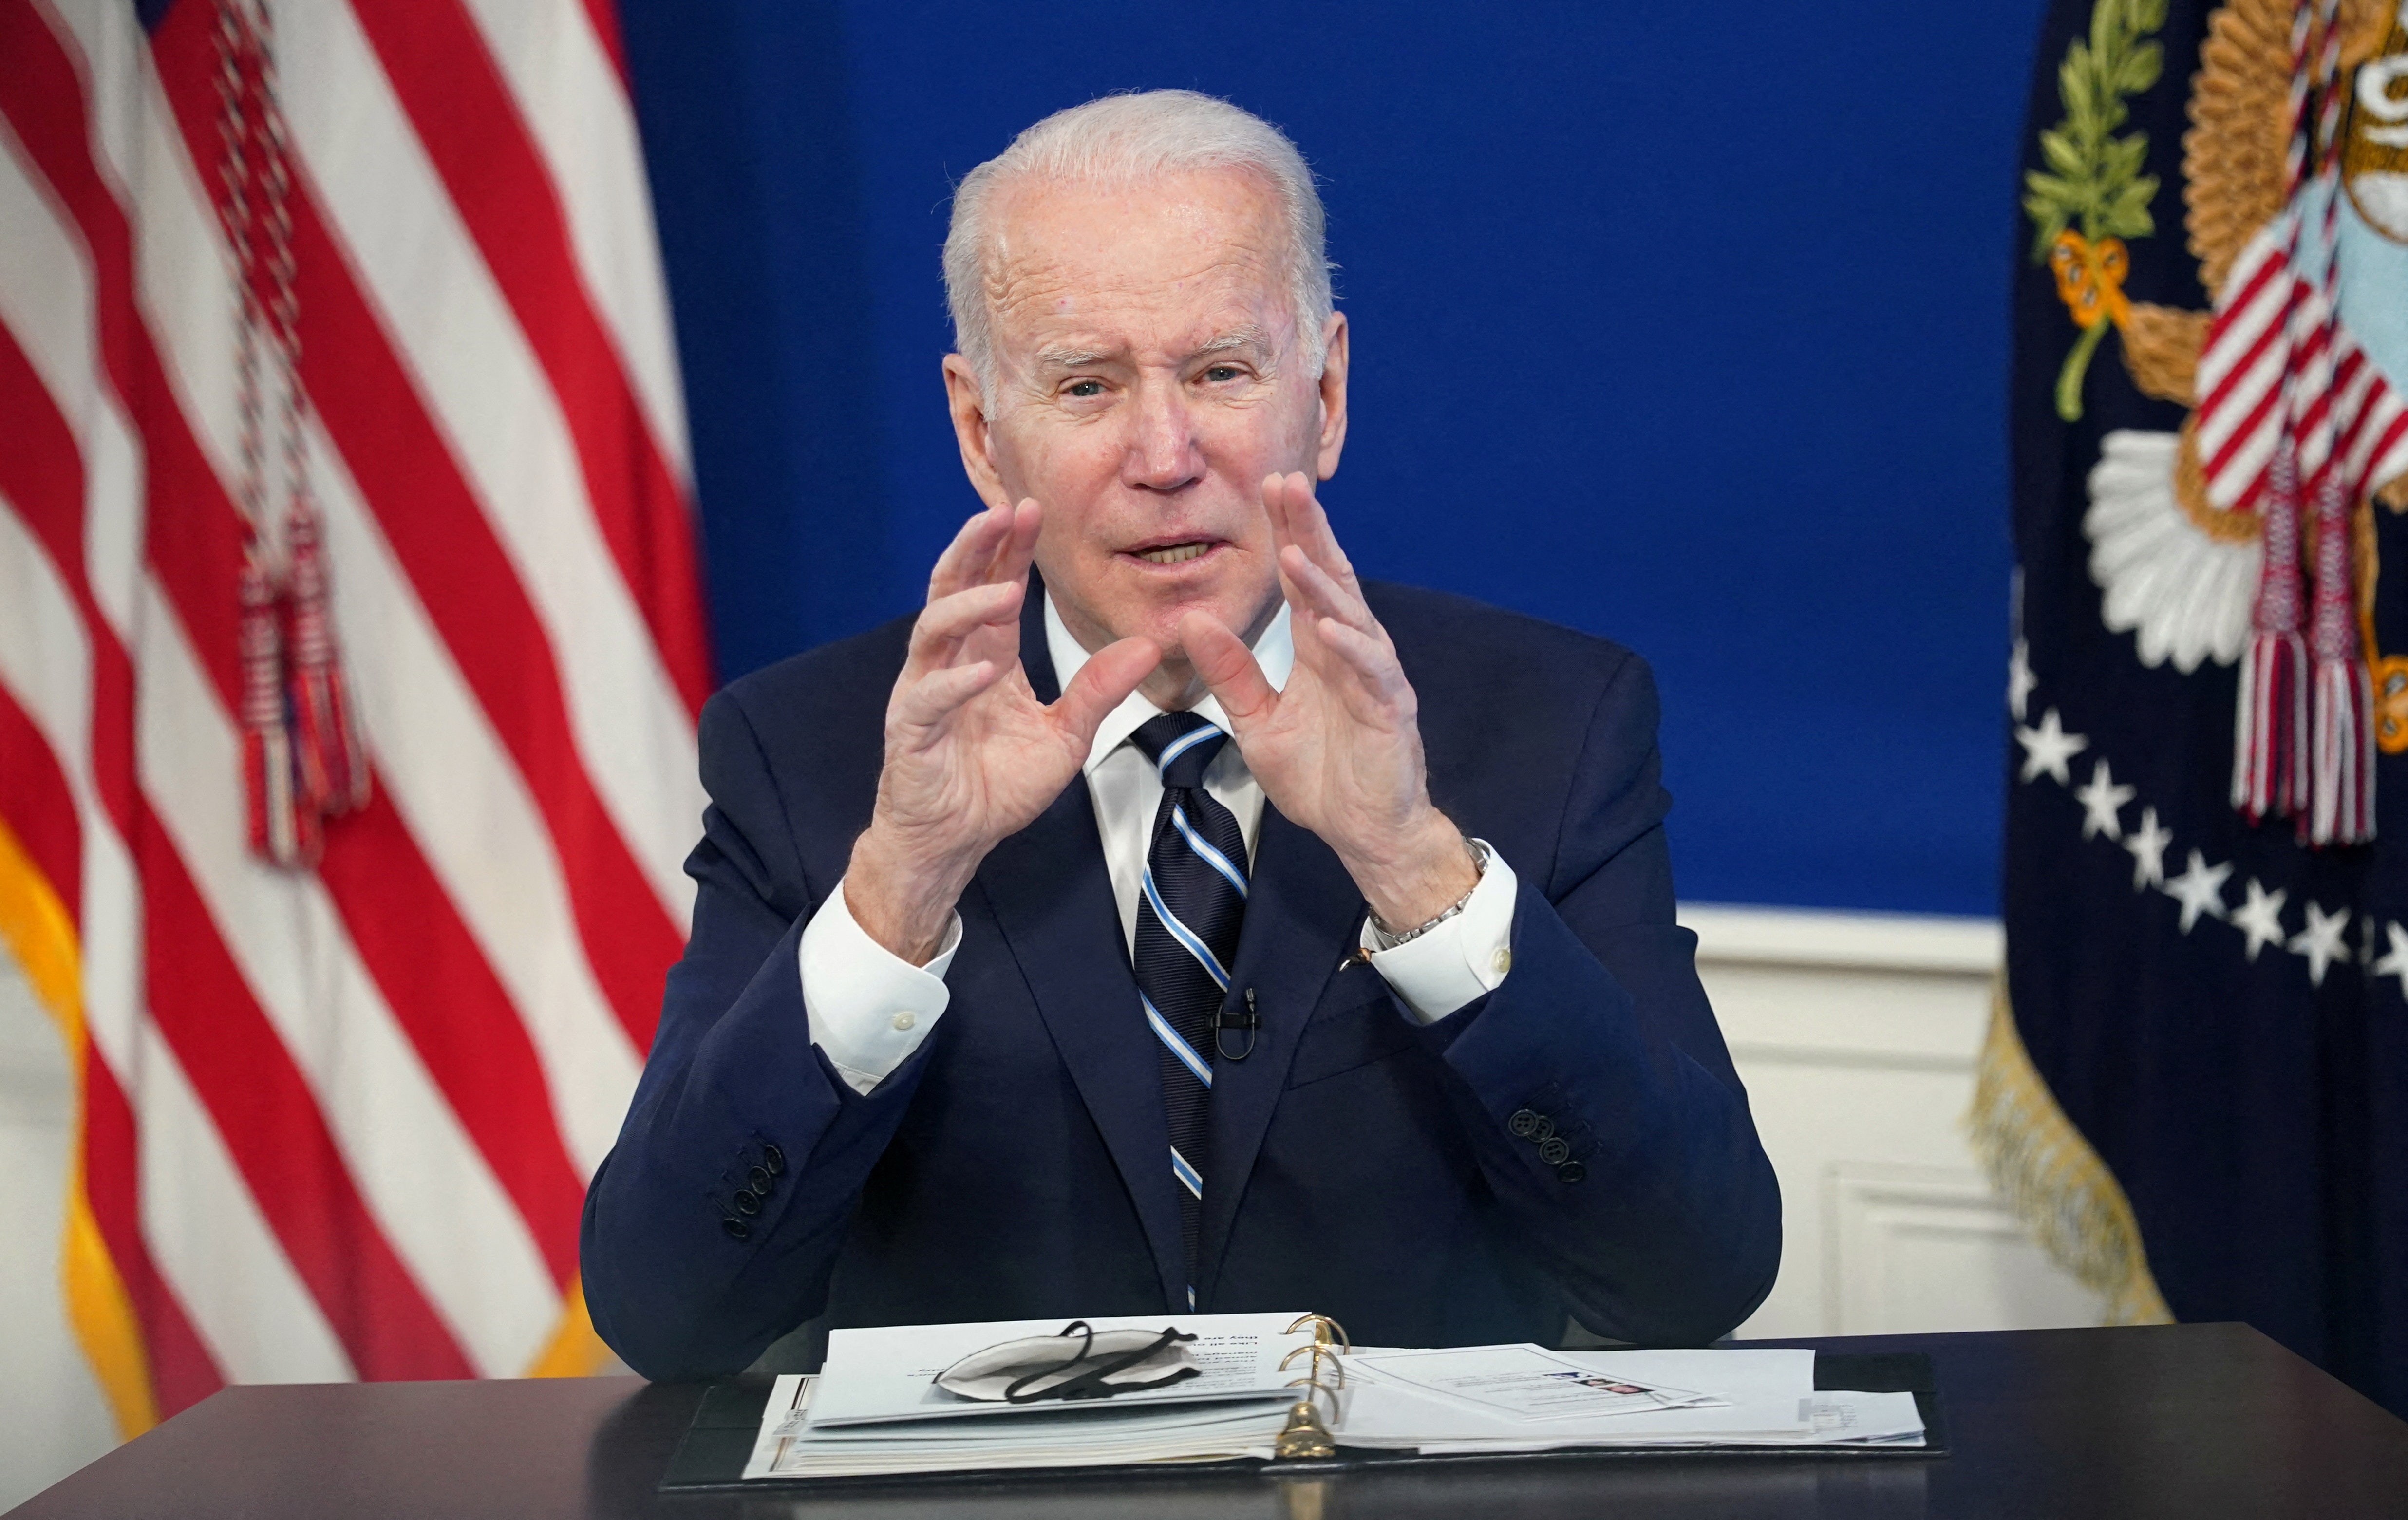 Democrats reportedly believe Biden hasn’t taken advantage of presidential platform: ‘I don’t know where he is’